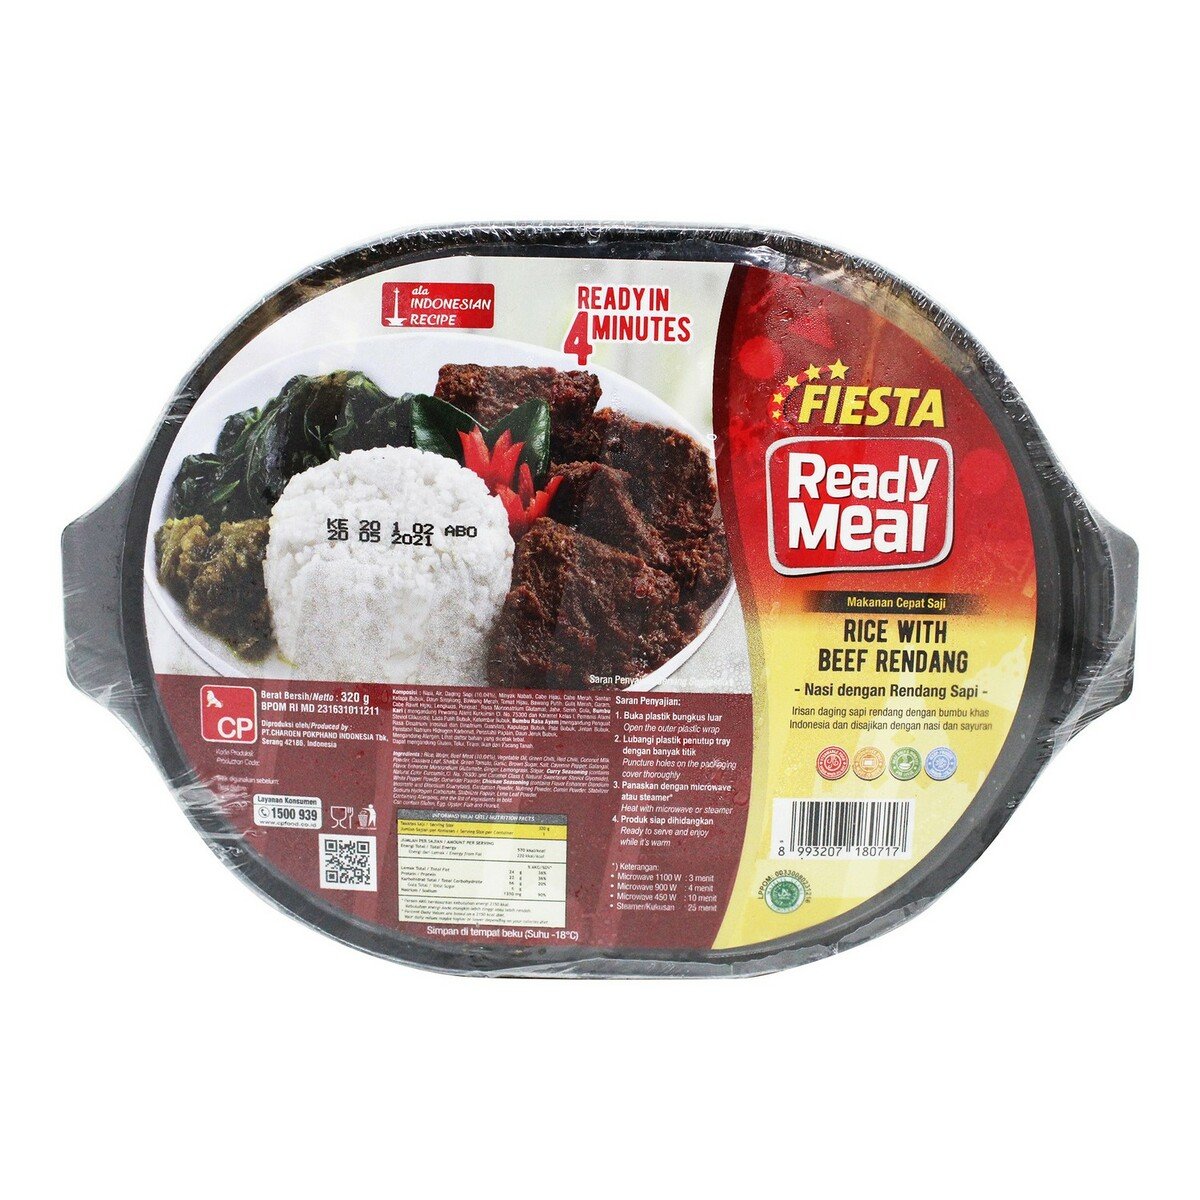 Fiesta Raedy Meal Beef Rendang With Rice 320g